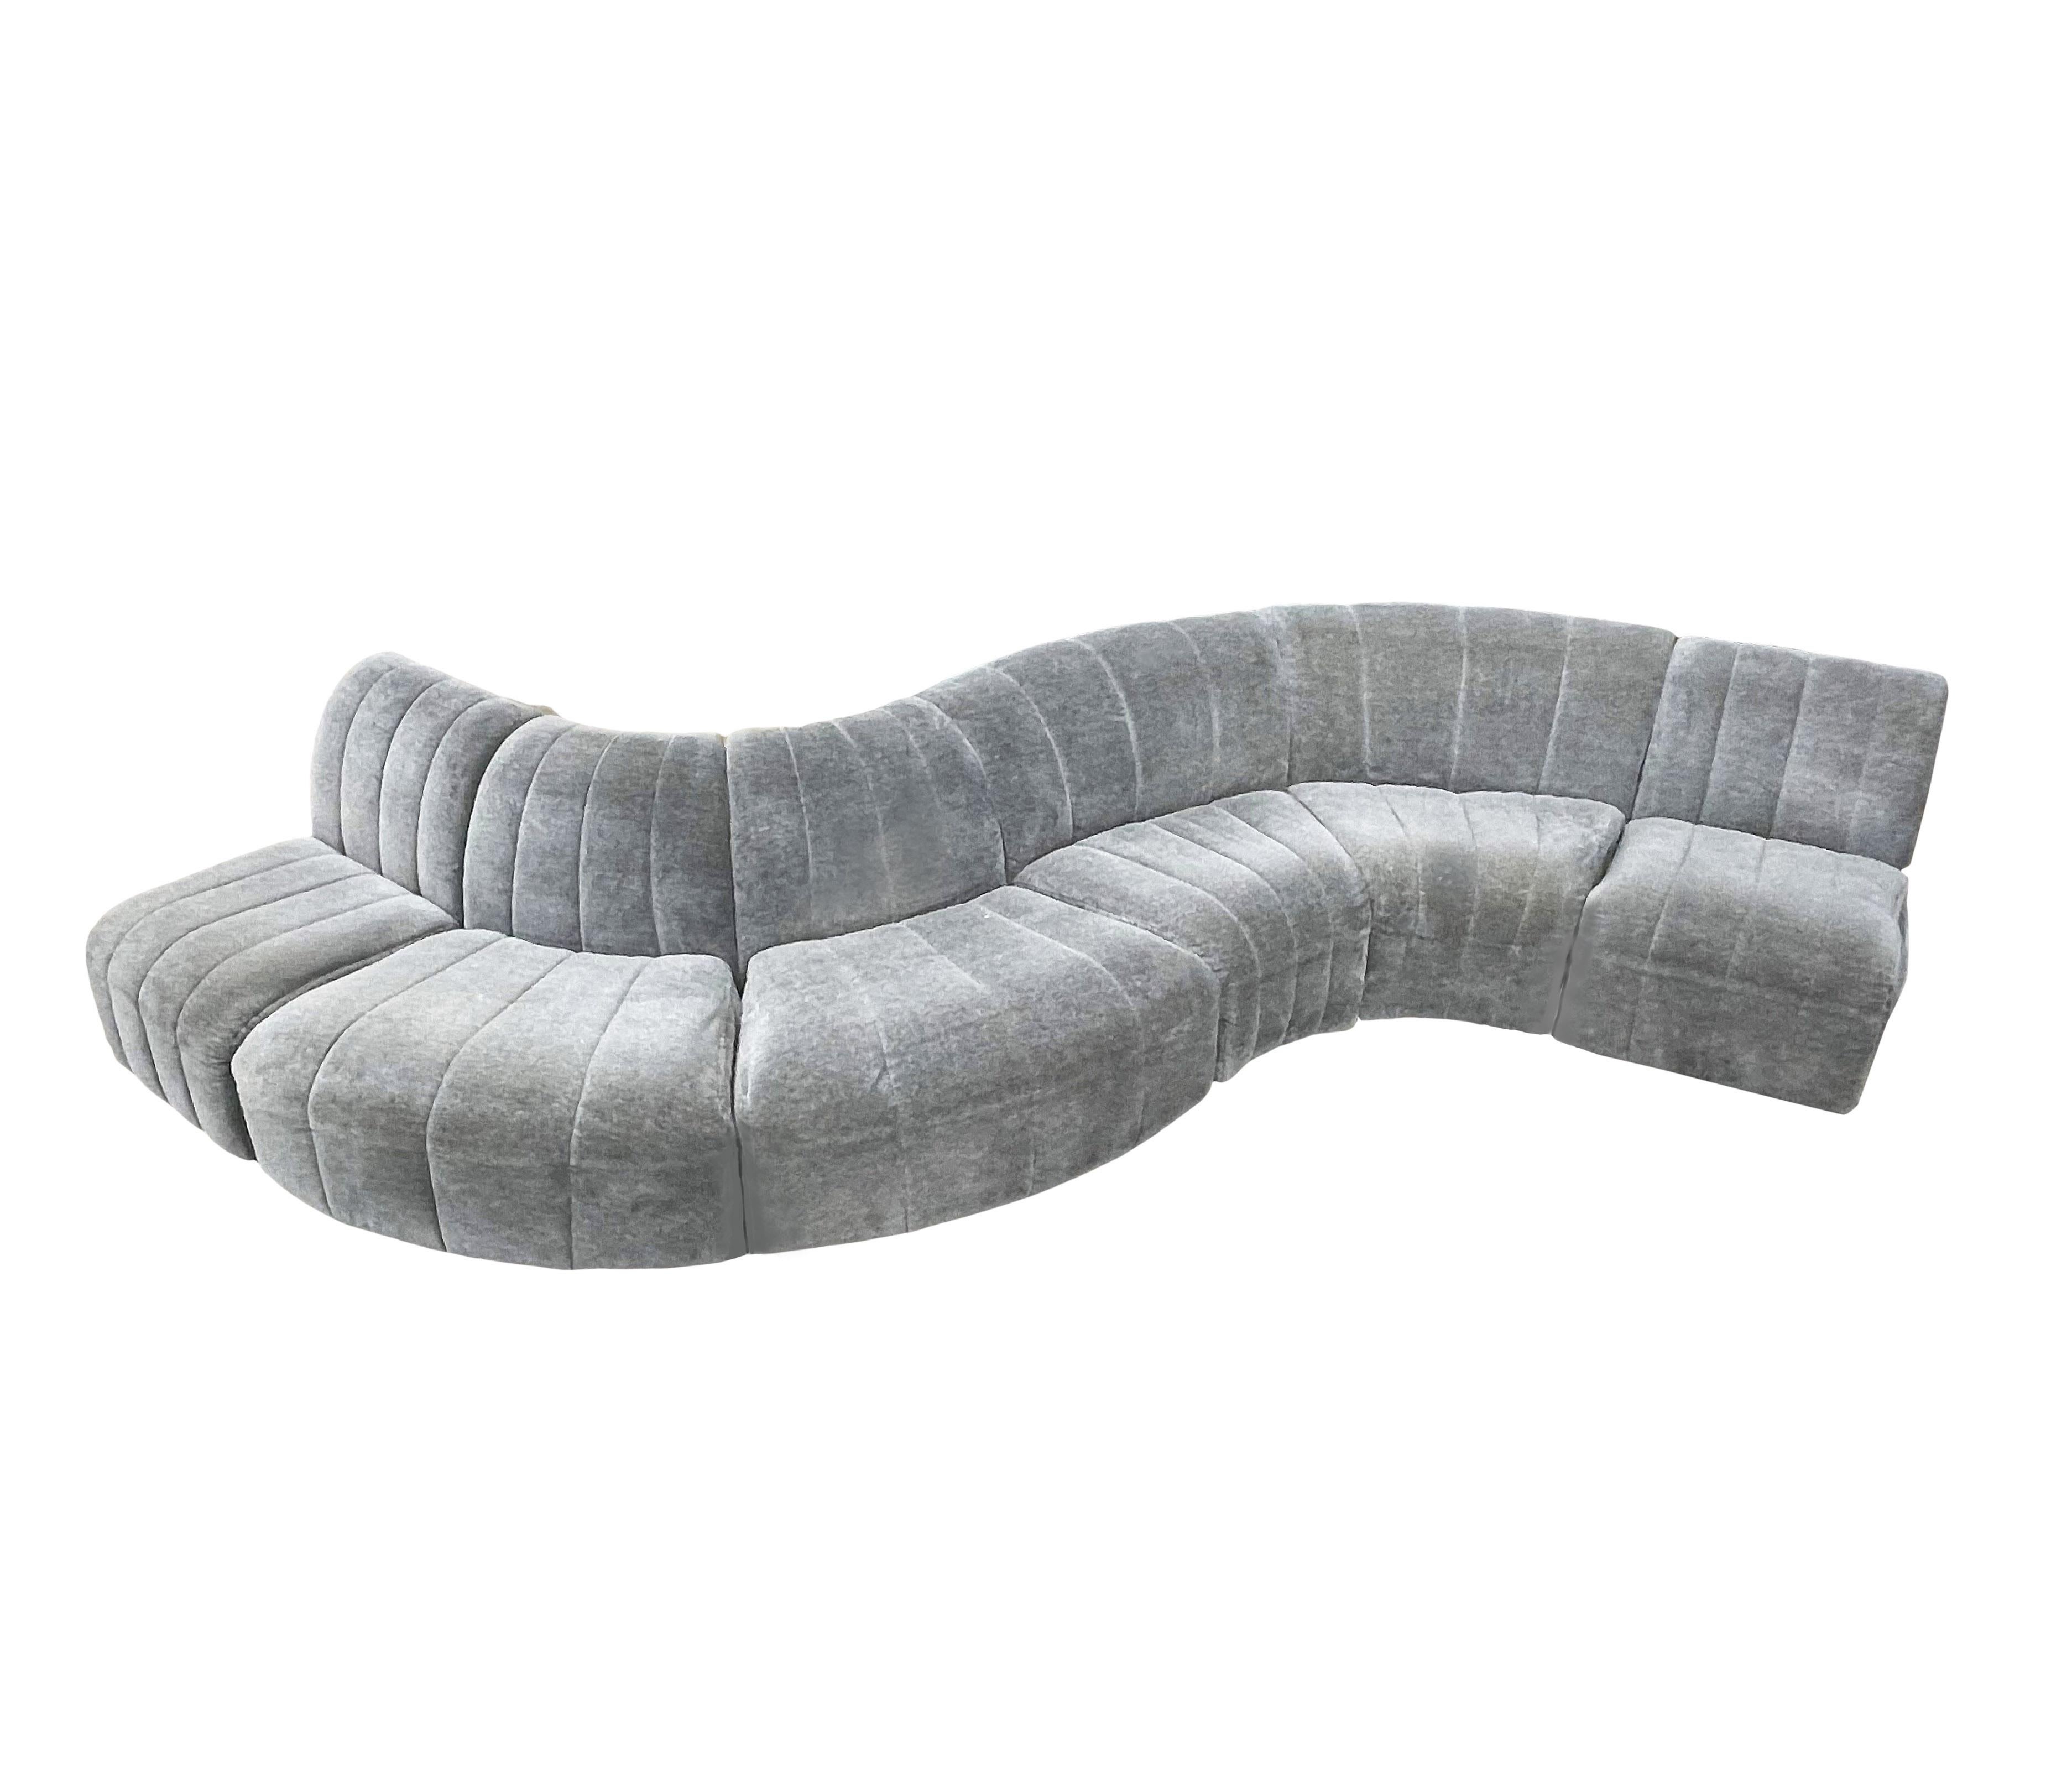 A curvy modular sofa designed by Milo Baughman and produced by Thayer Coggin in the 1960s. It features a six-piece modular design. Fabric is original gray mohair and is tired. Recovering is recommended but can be used as is. Manufacturer label.